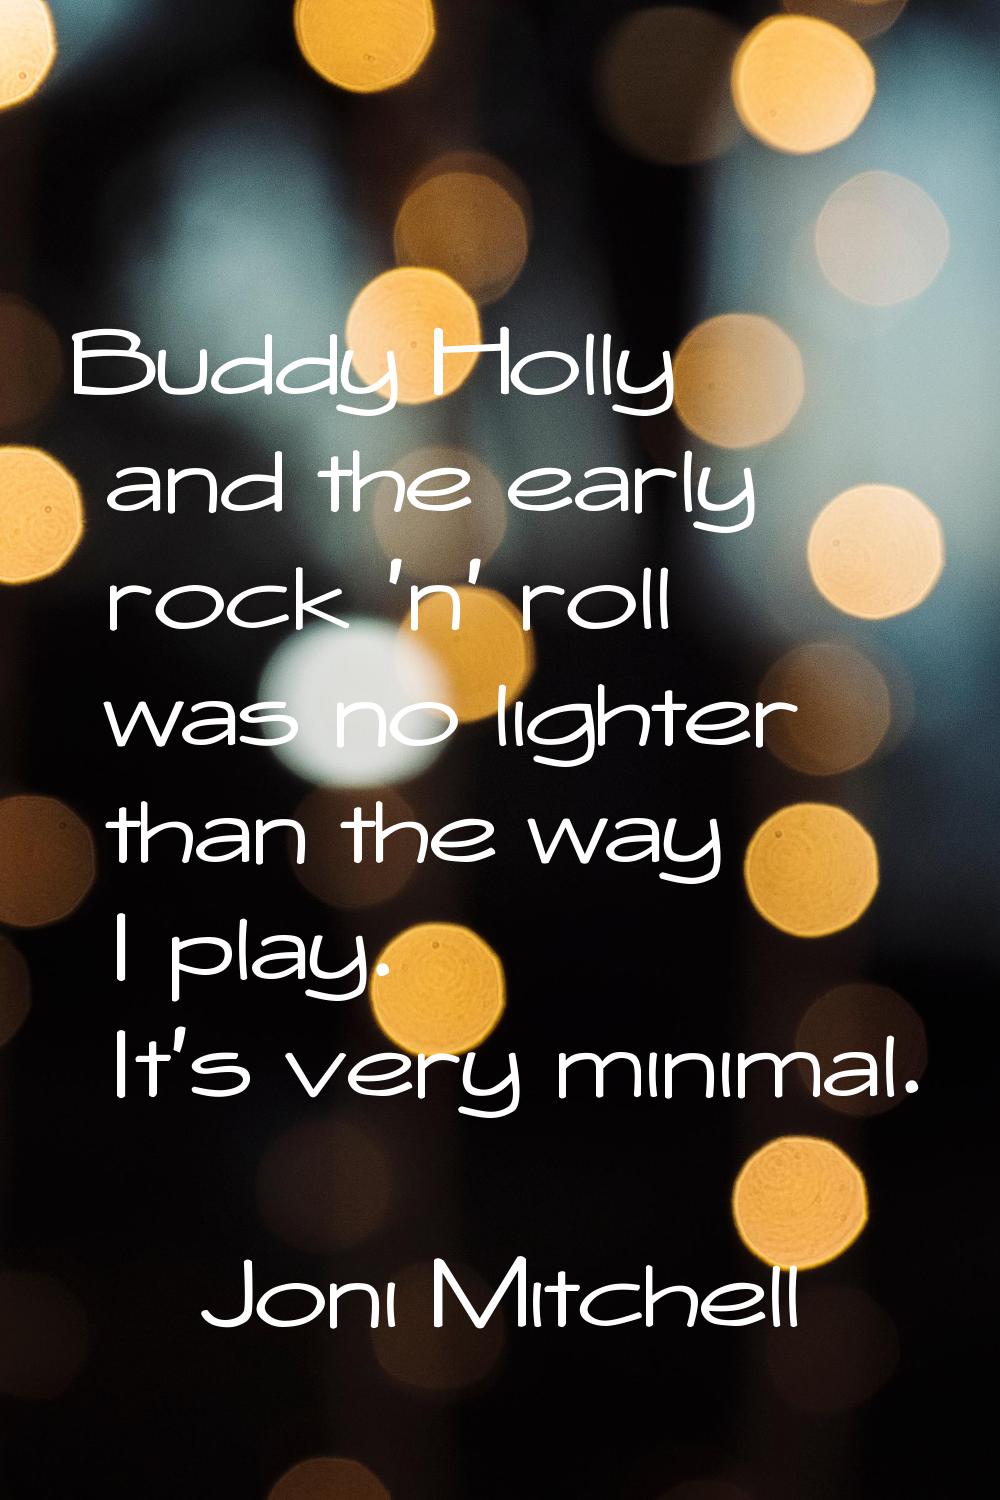 Buddy Holly and the early rock 'n' roll was no lighter than the way I play. It's very minimal.